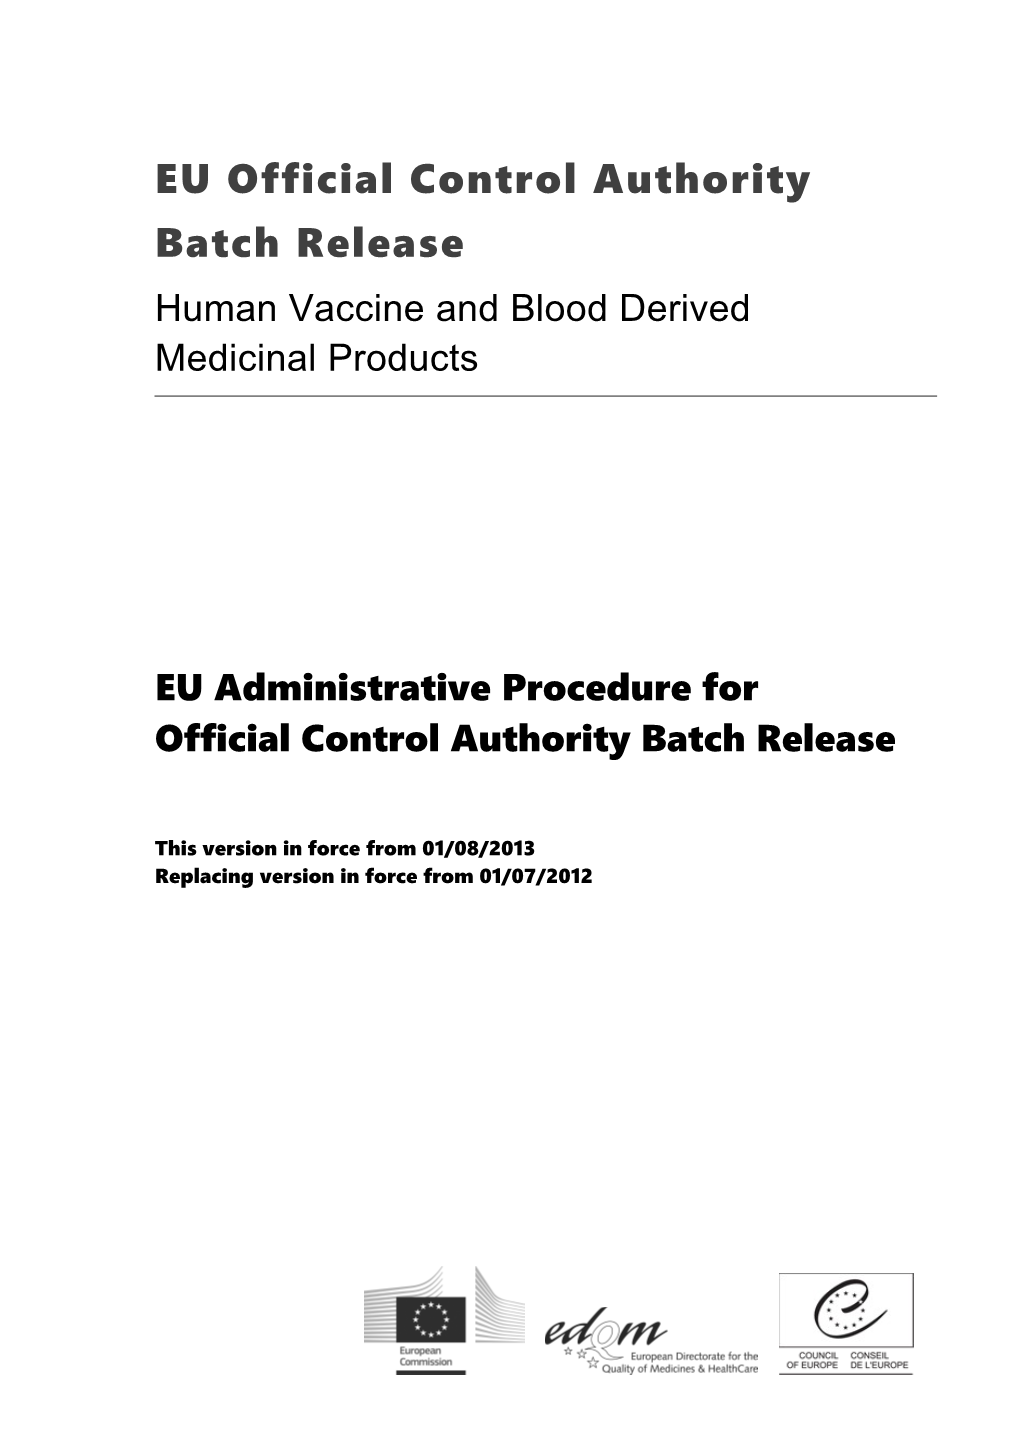 Control Authority Batch Release of Vaccines and Blood Products